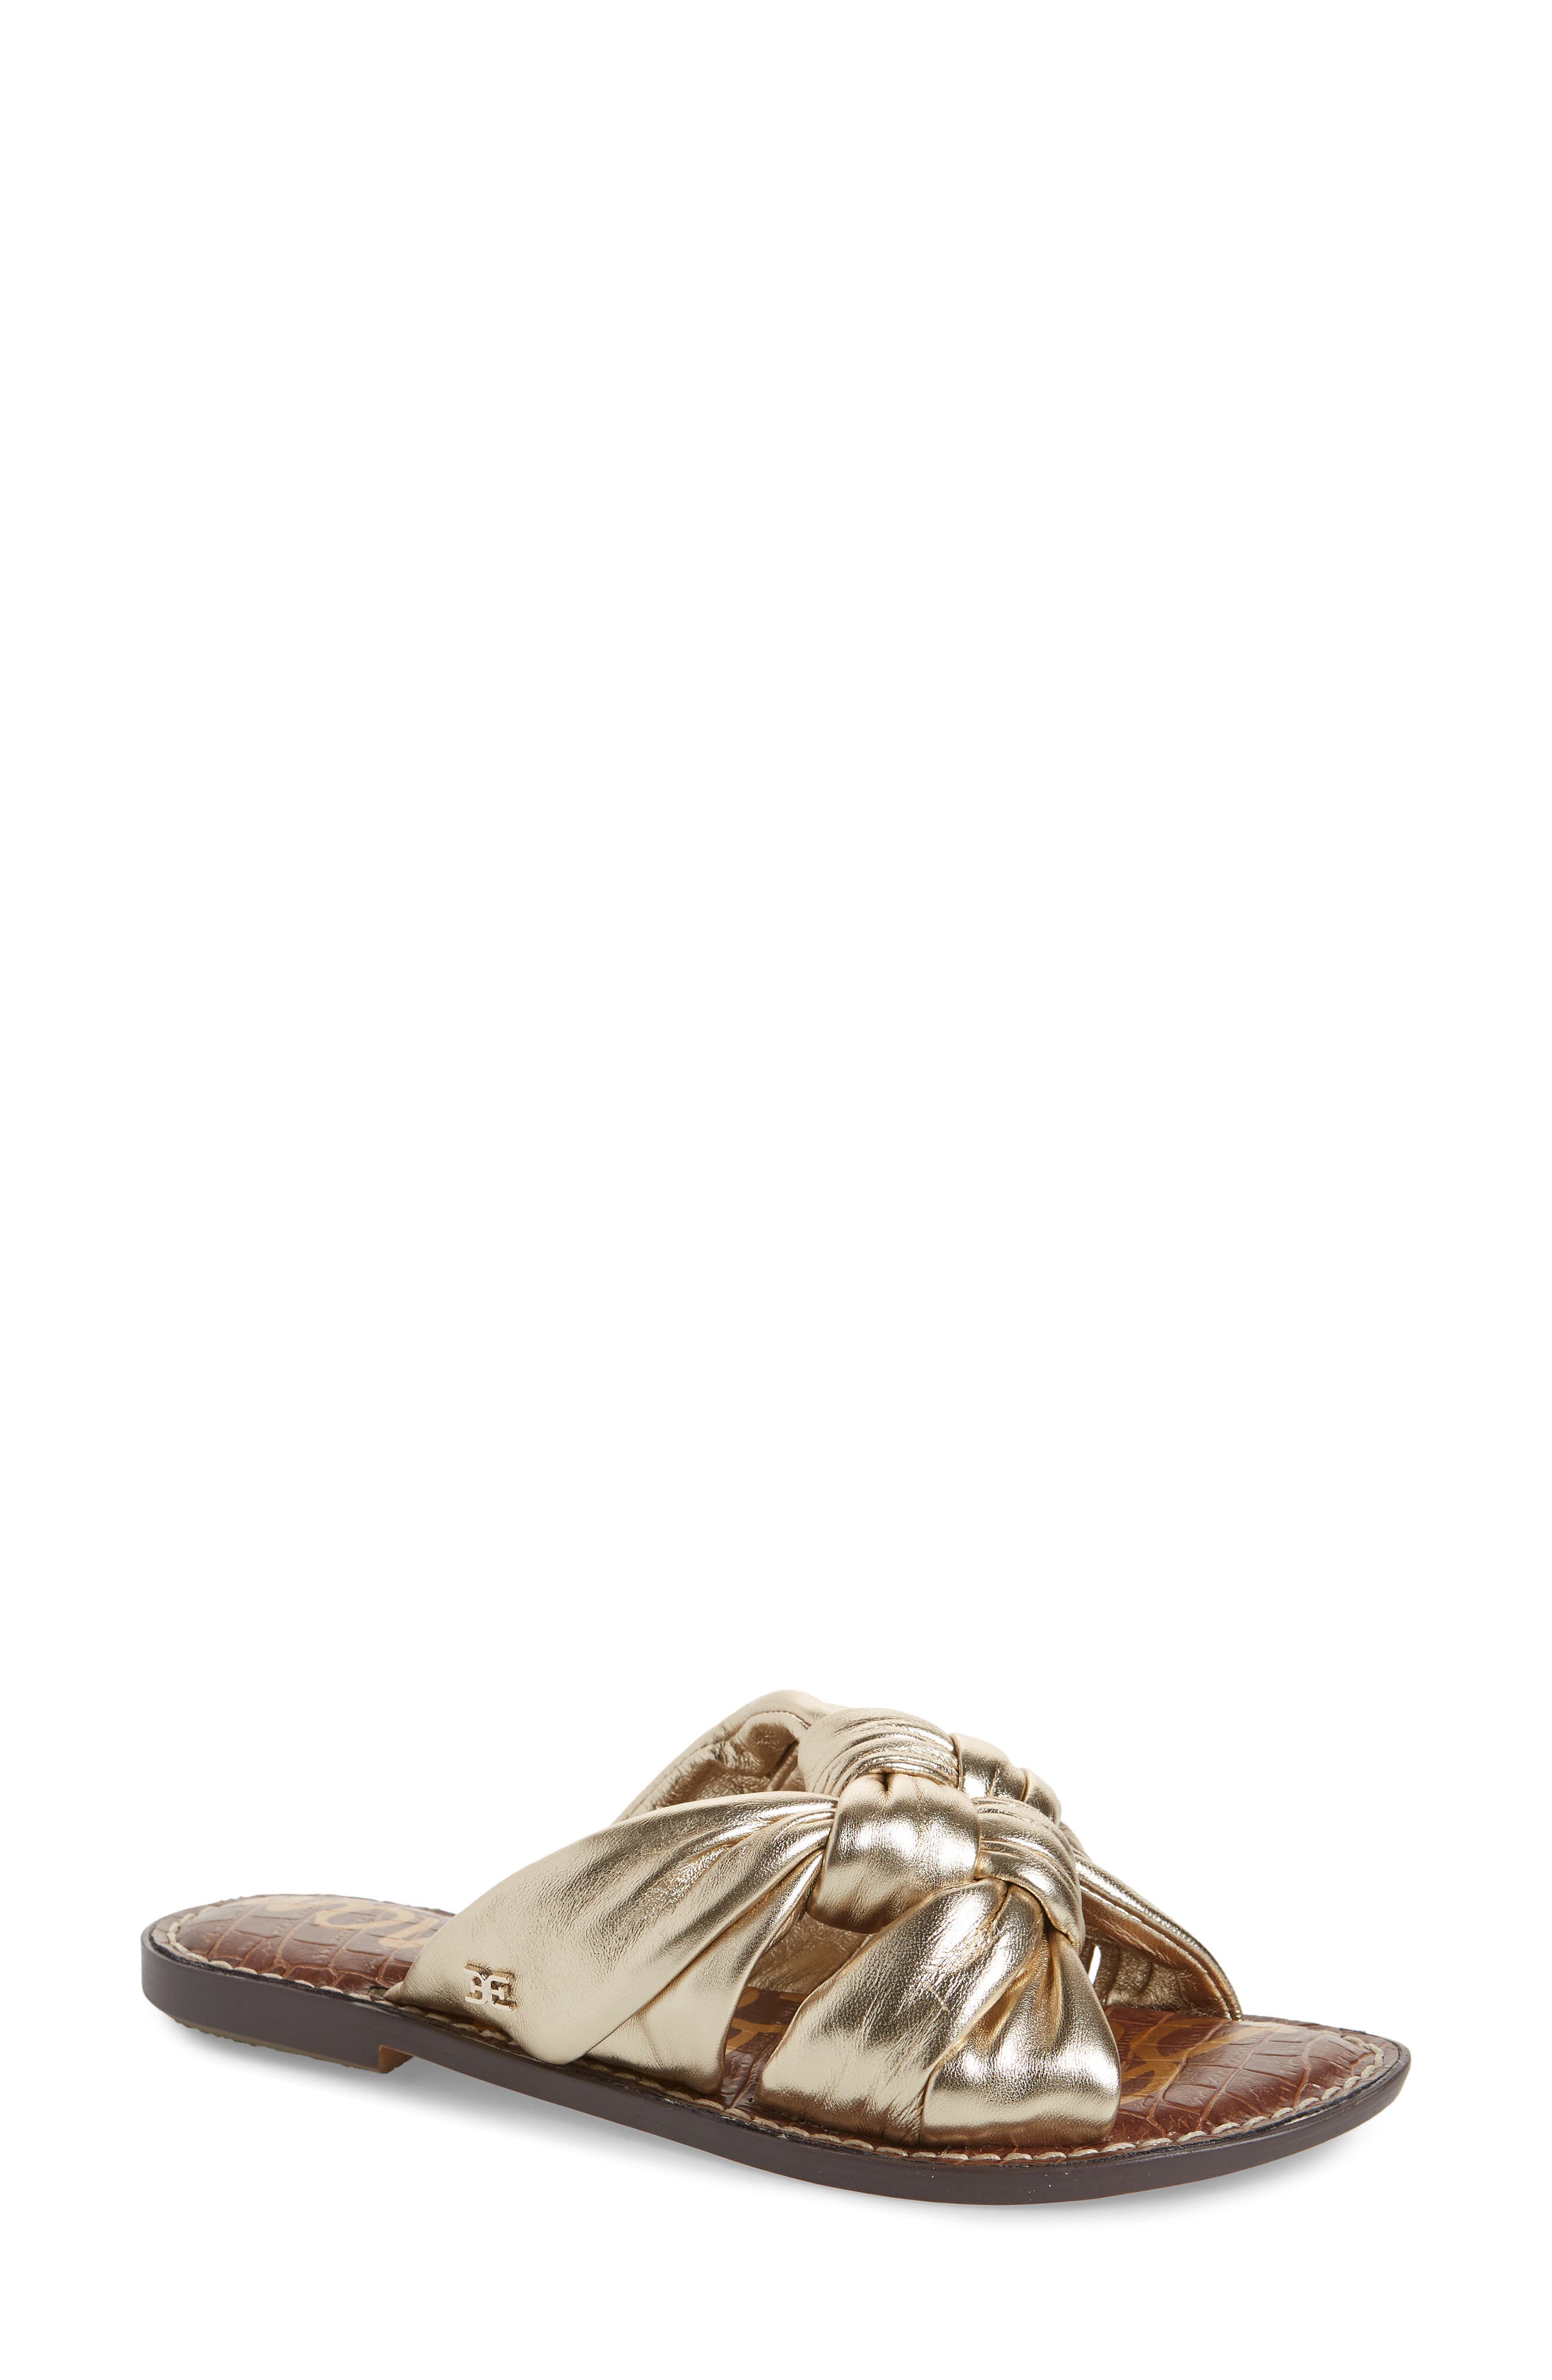 Buy > gold strappy sandals flat > in stock